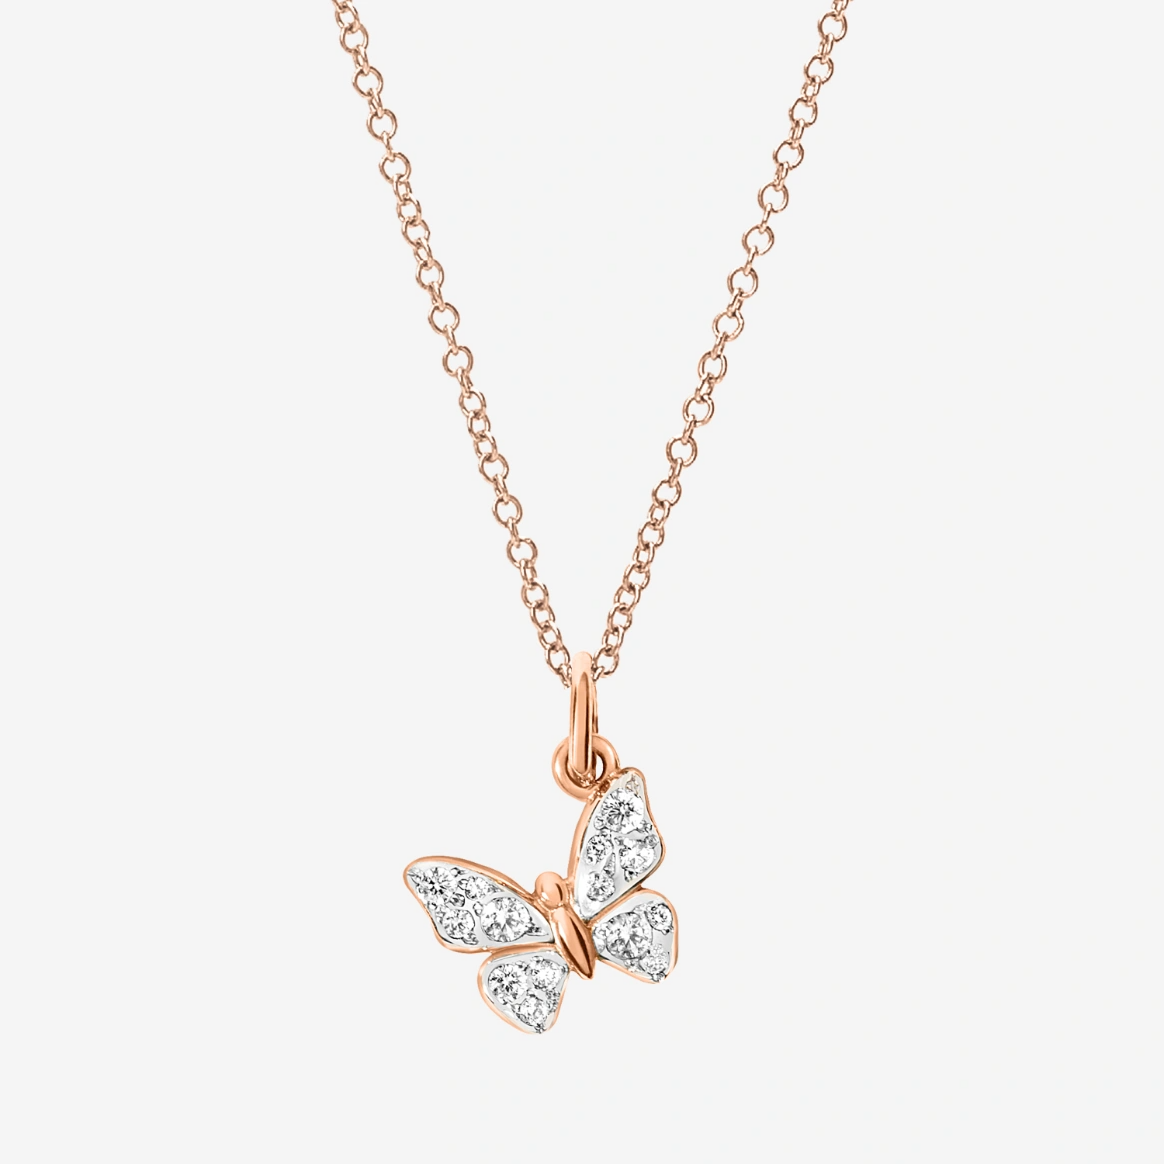 Dodo Butterfly Charm in 9k Rose Gold and White Diamonds - Orsini Jewellers